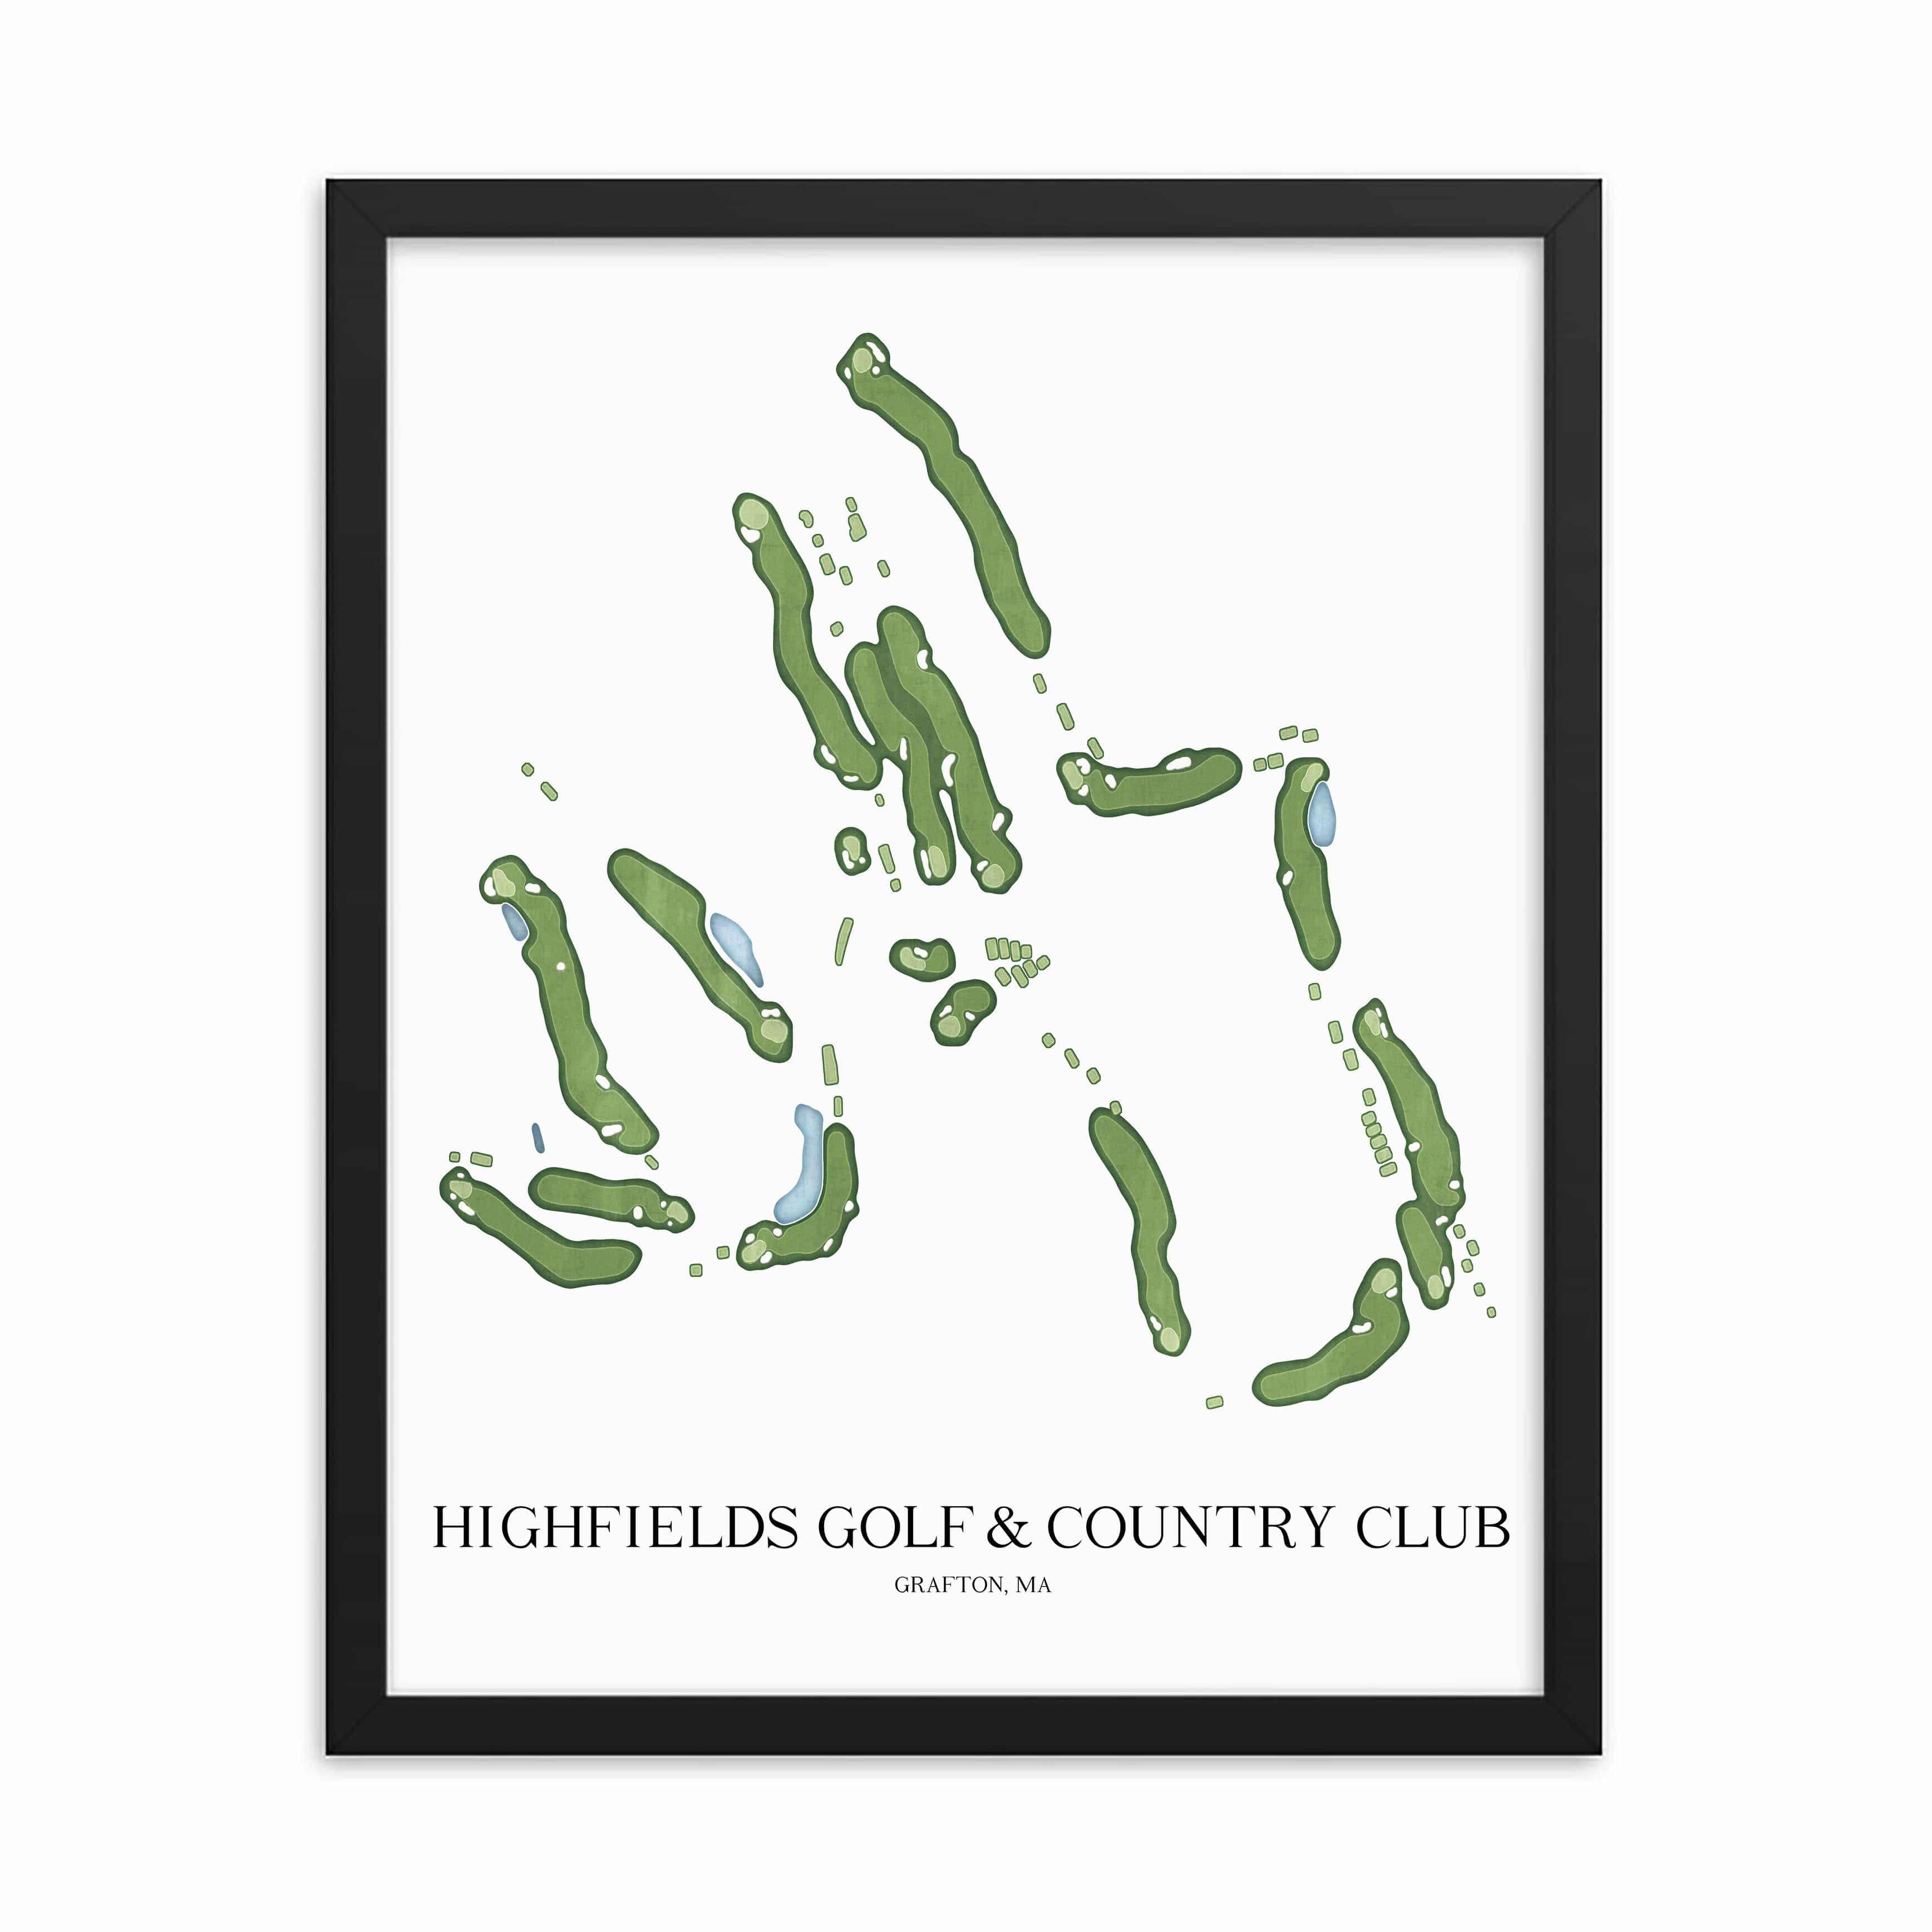 The 19th Hole Golf Shop - Golf Course Prints -  Highfields Golf Country Club Golf Course Map